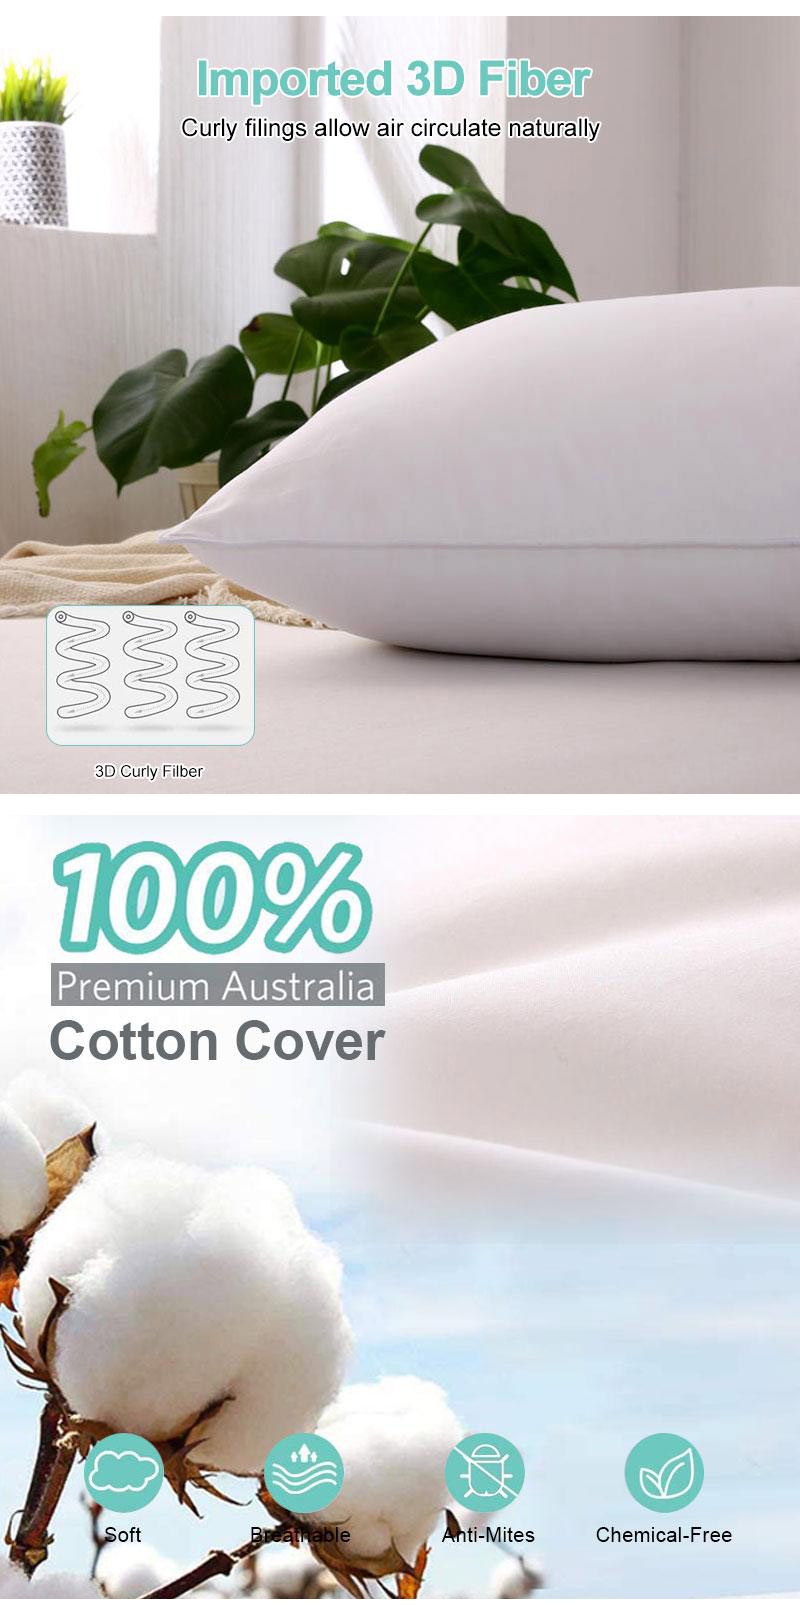 Premium Hotel Bed Pillows Washable